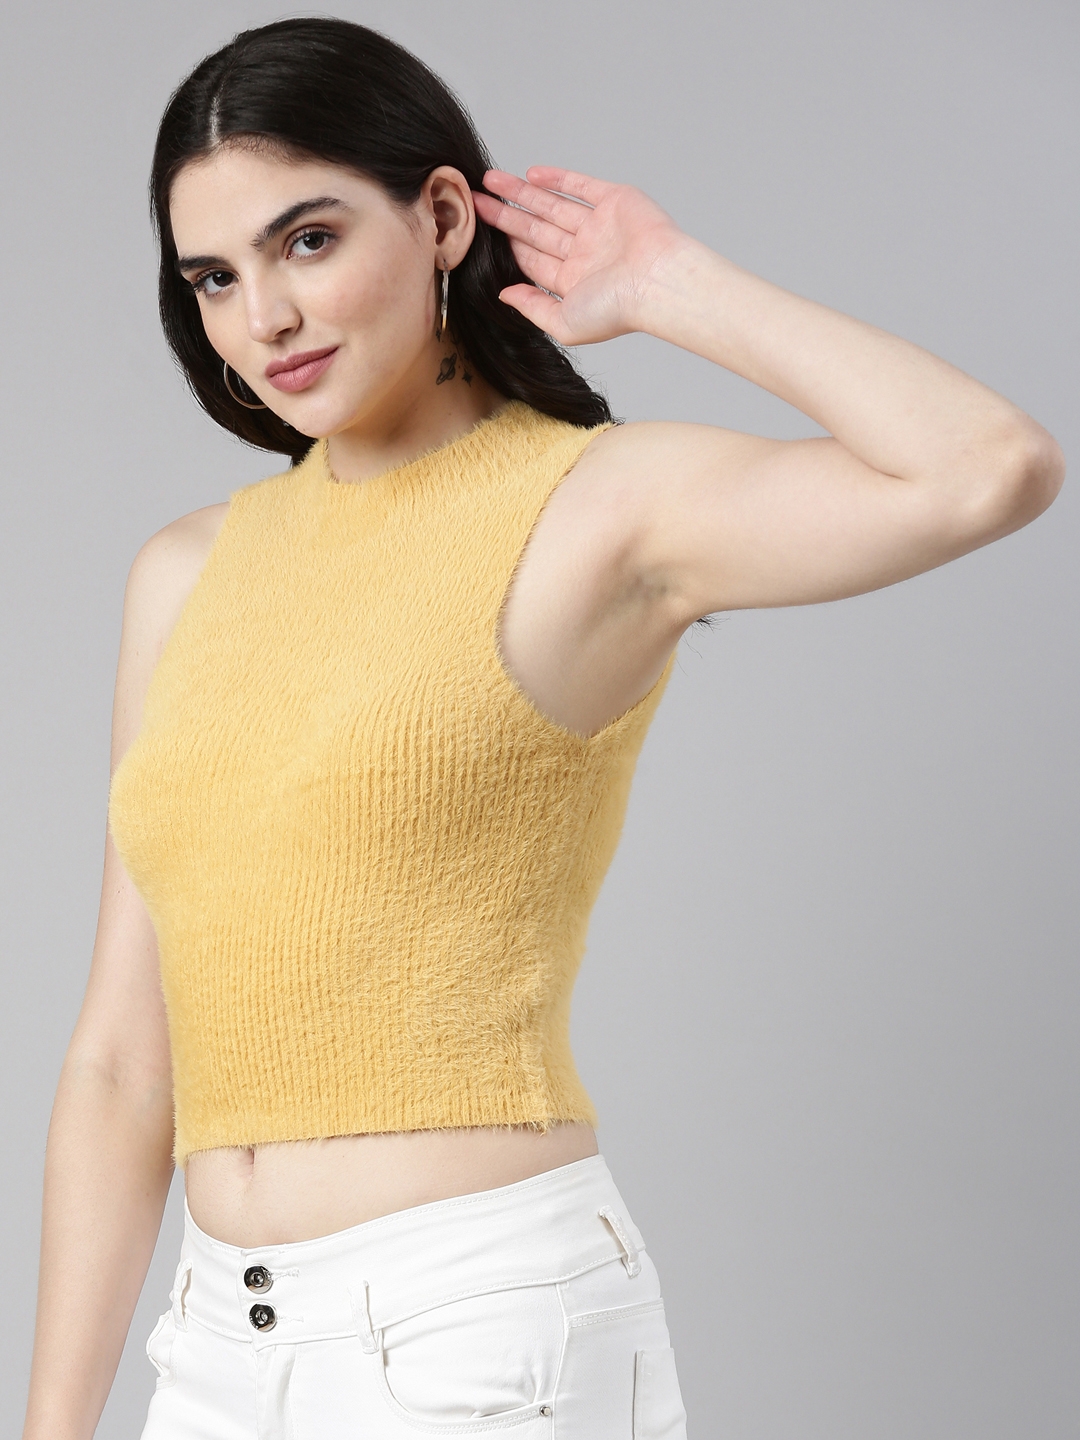 Showoff | SHOWOFF Women's High Neck Solid Sleeveless Mustard Tank Top 3